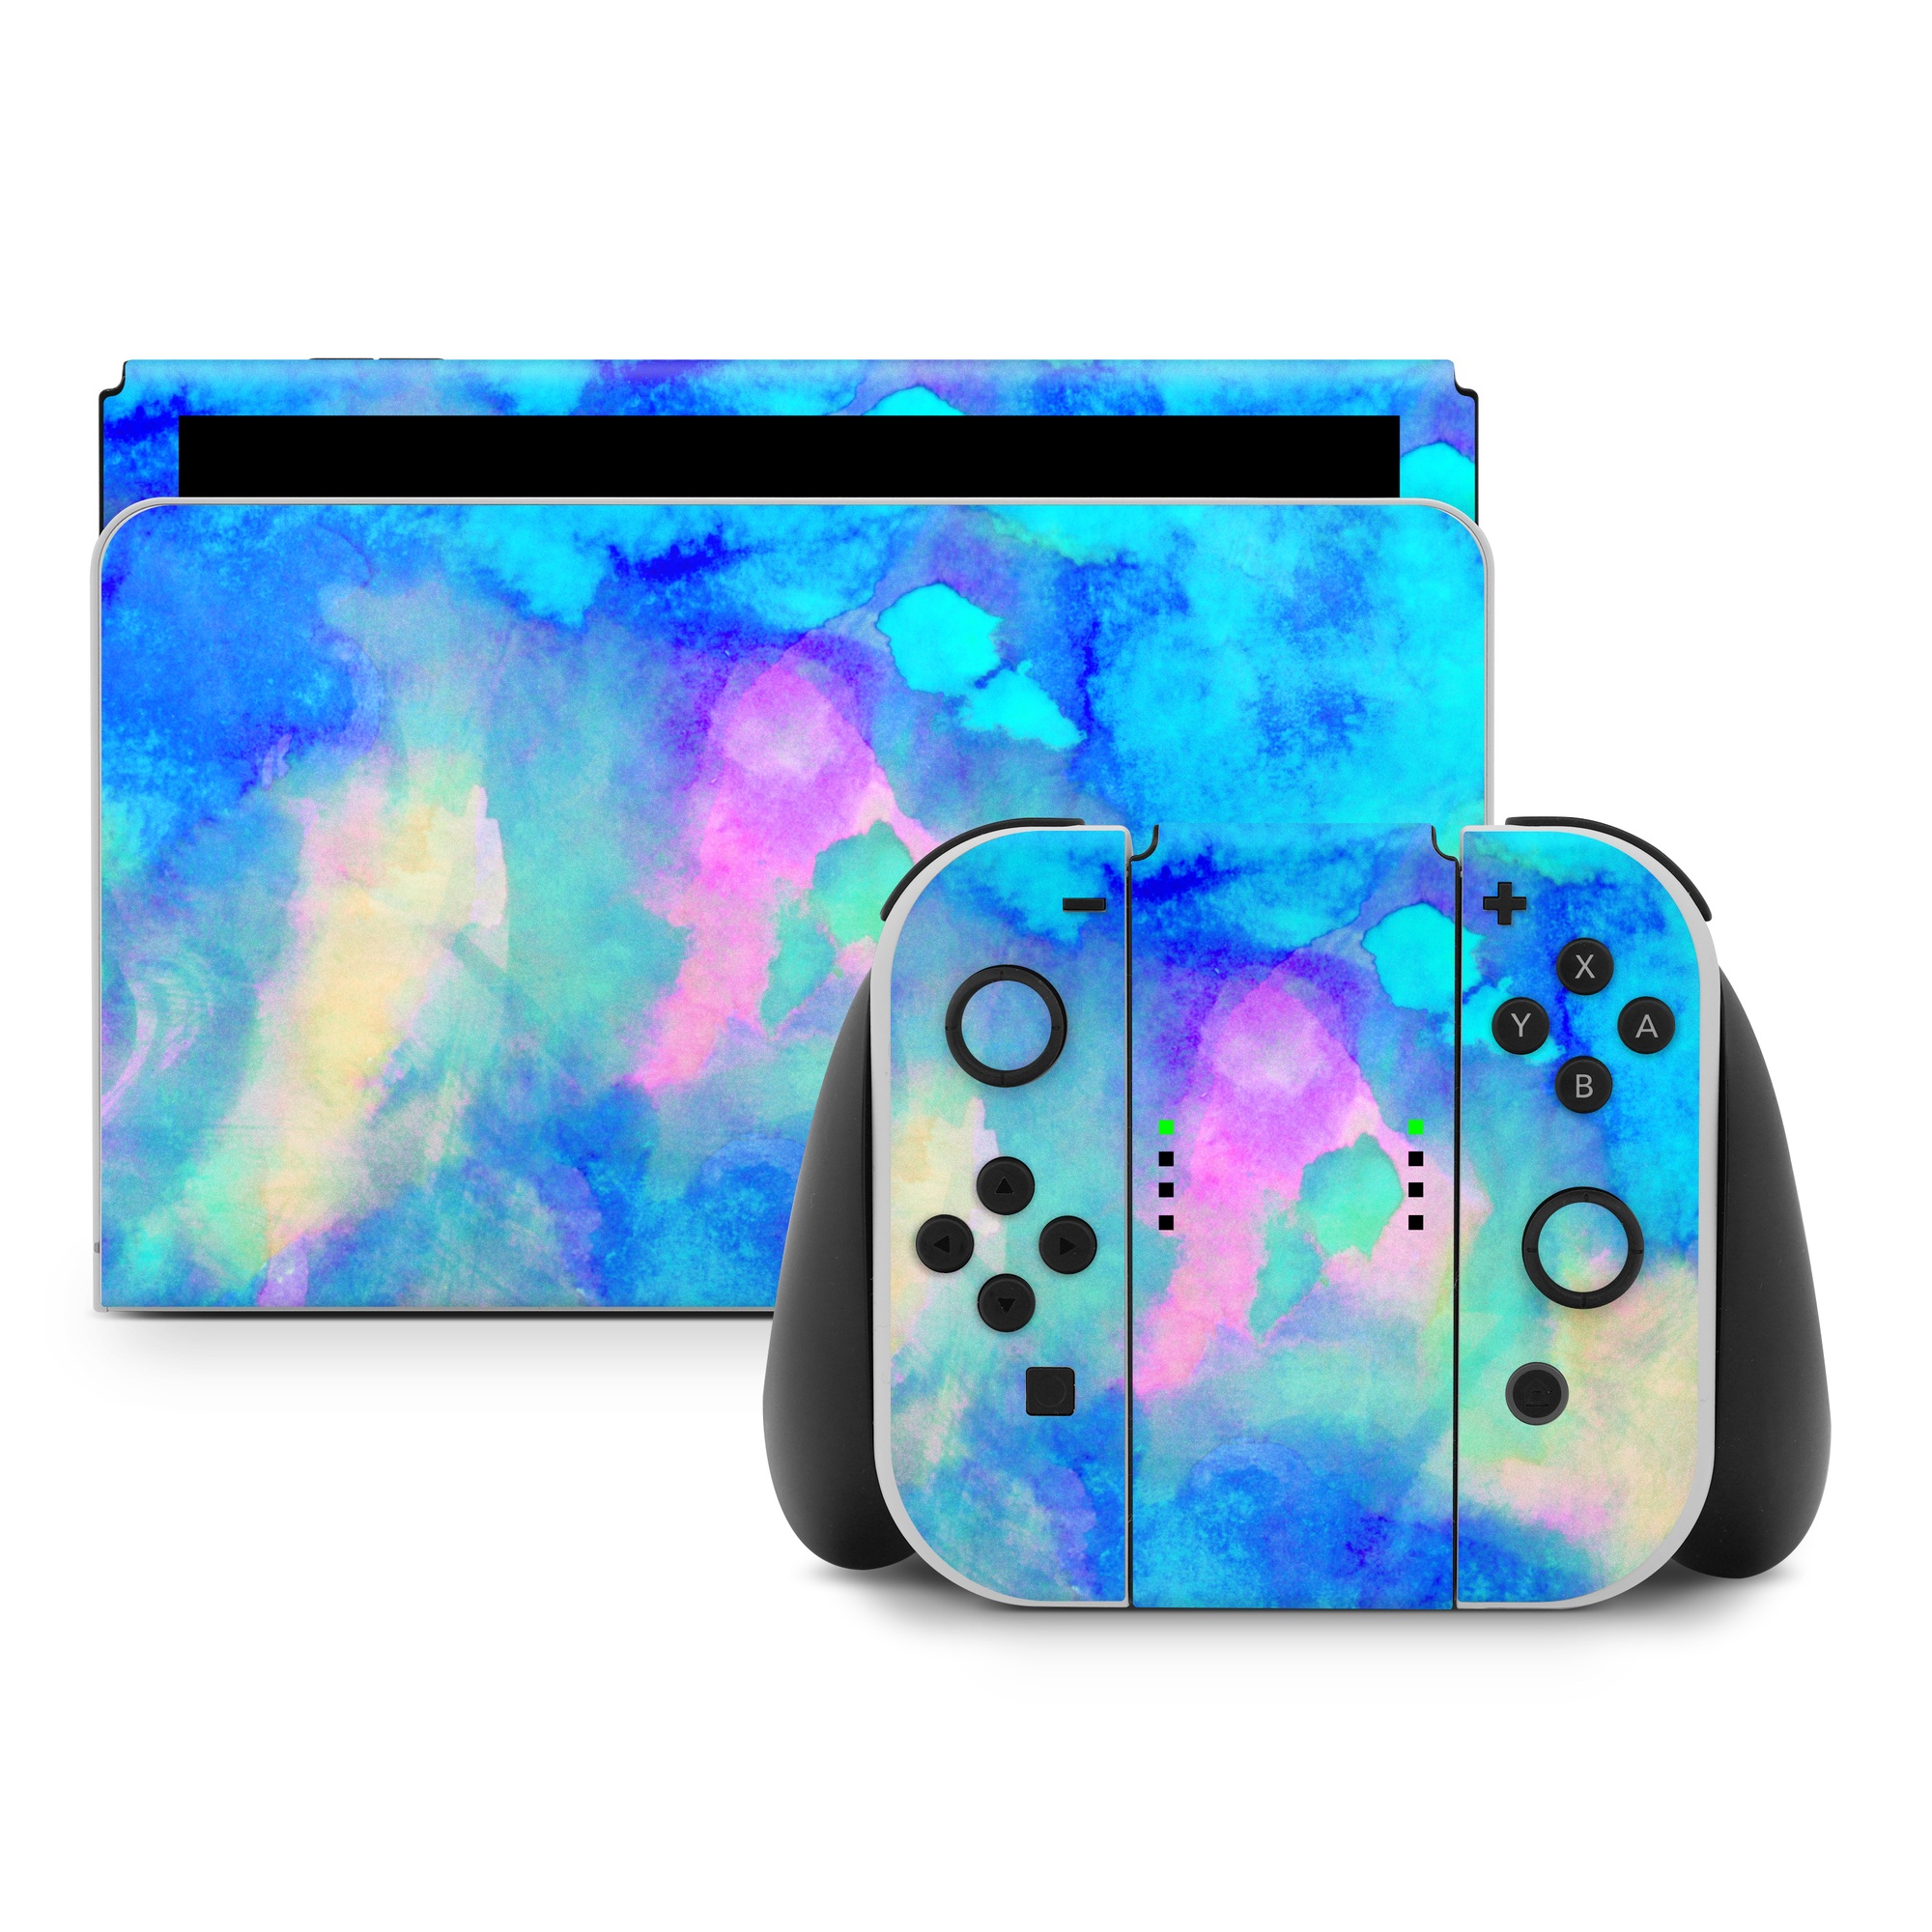 nintendo switch controller cover